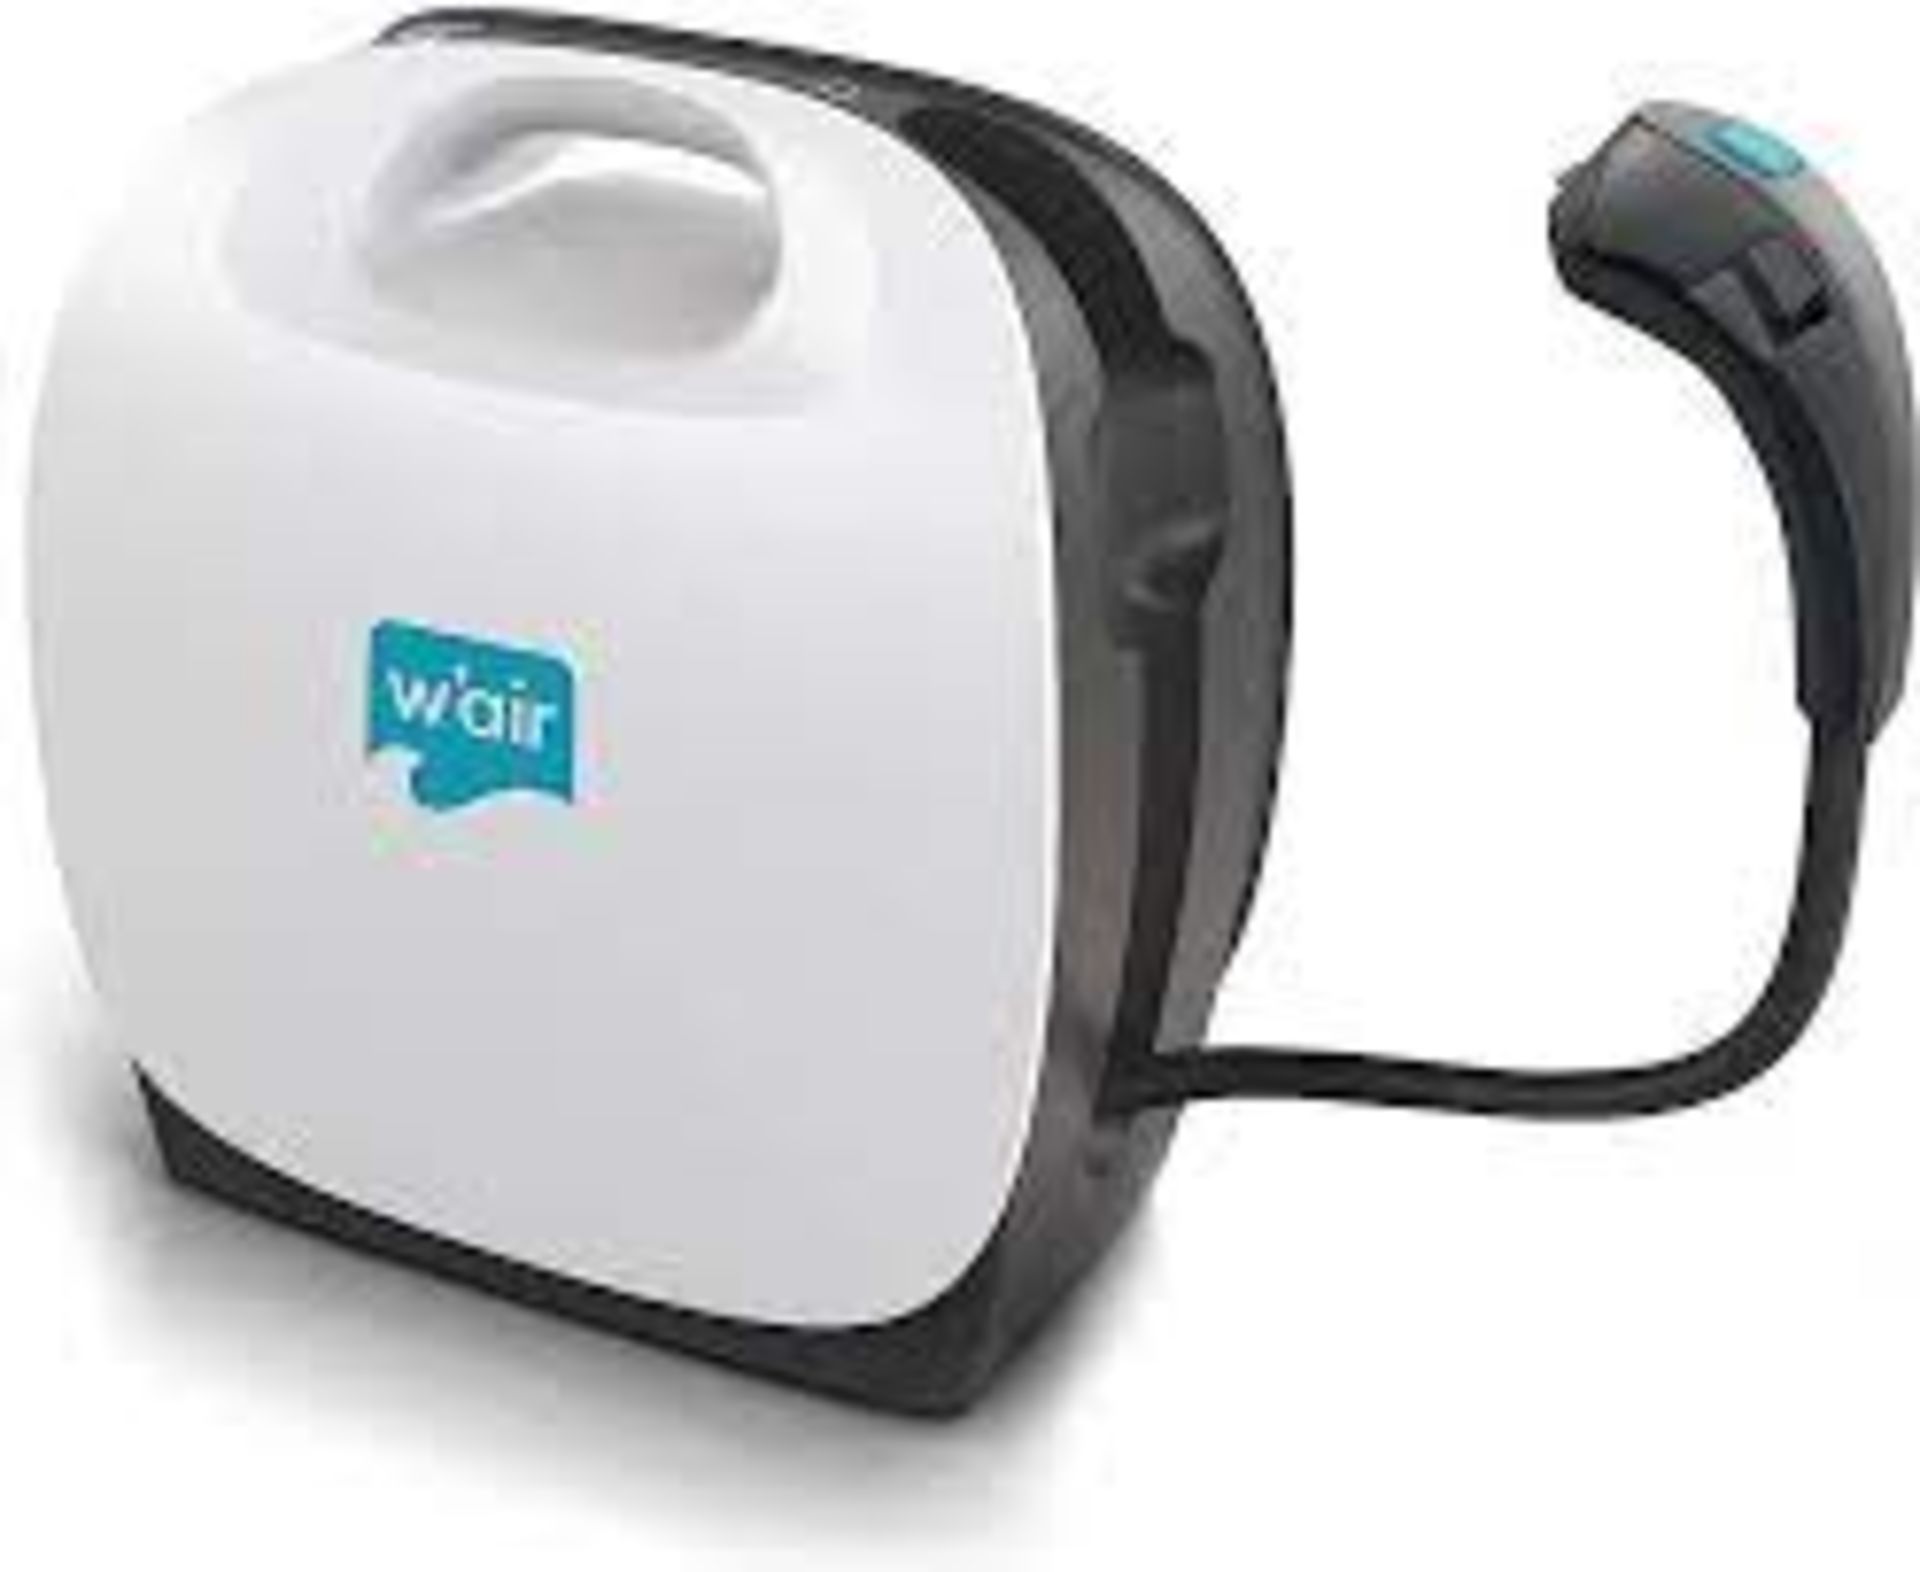 100 X BRAND NEW W'AIR SNEAKER CLEANING SYSTEMS RRP £299, The w'air uses hydrodynamic technology - Image 6 of 6